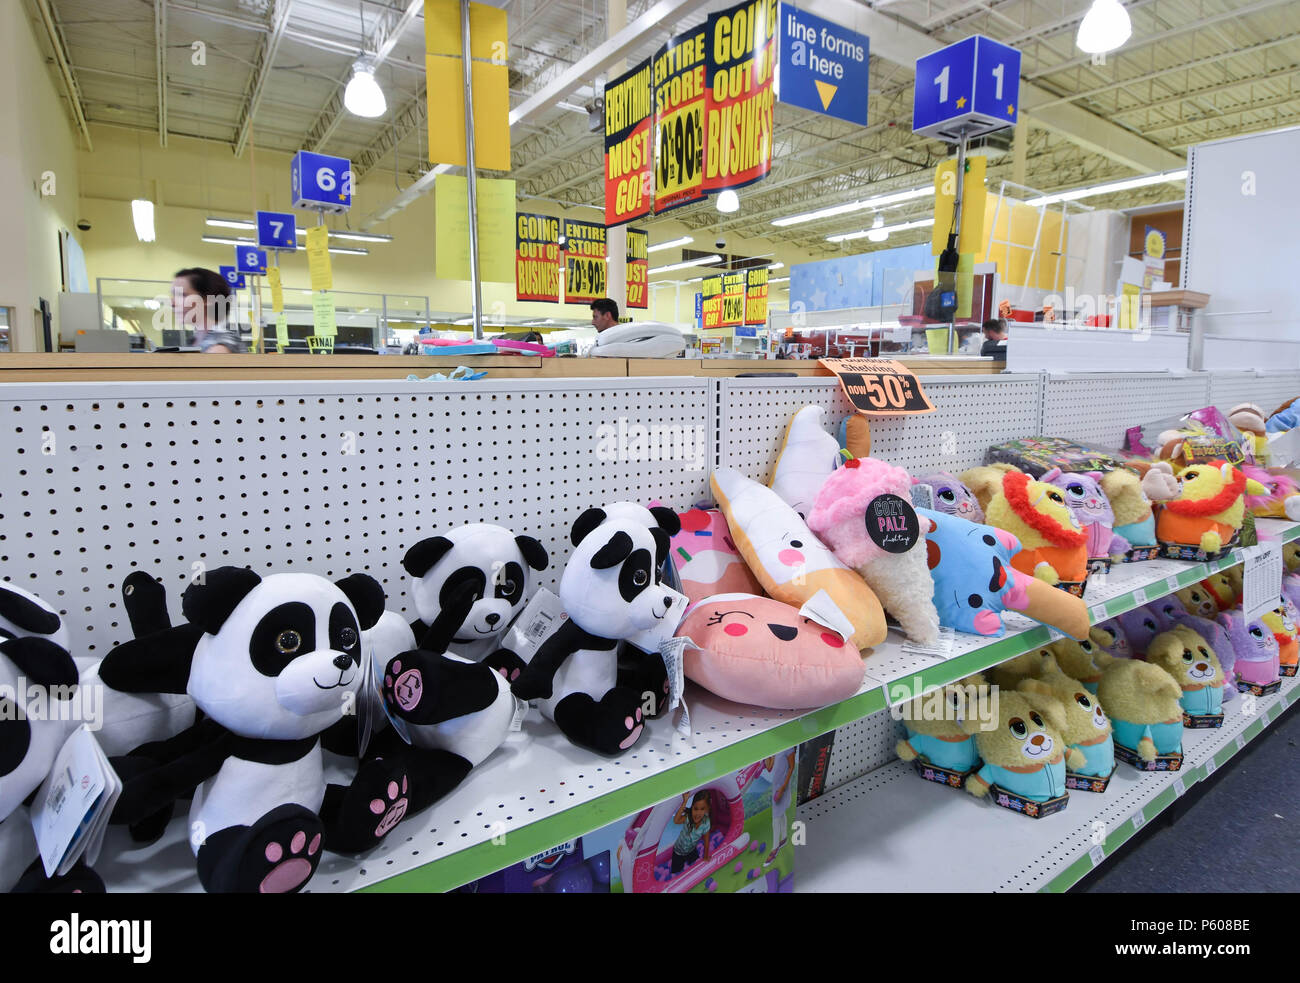 Stuffed animals sit untouched in a Toys R Us store in Manchester, N.H., USA, during its liquidation sale on June 25, 2018. Stock Photo